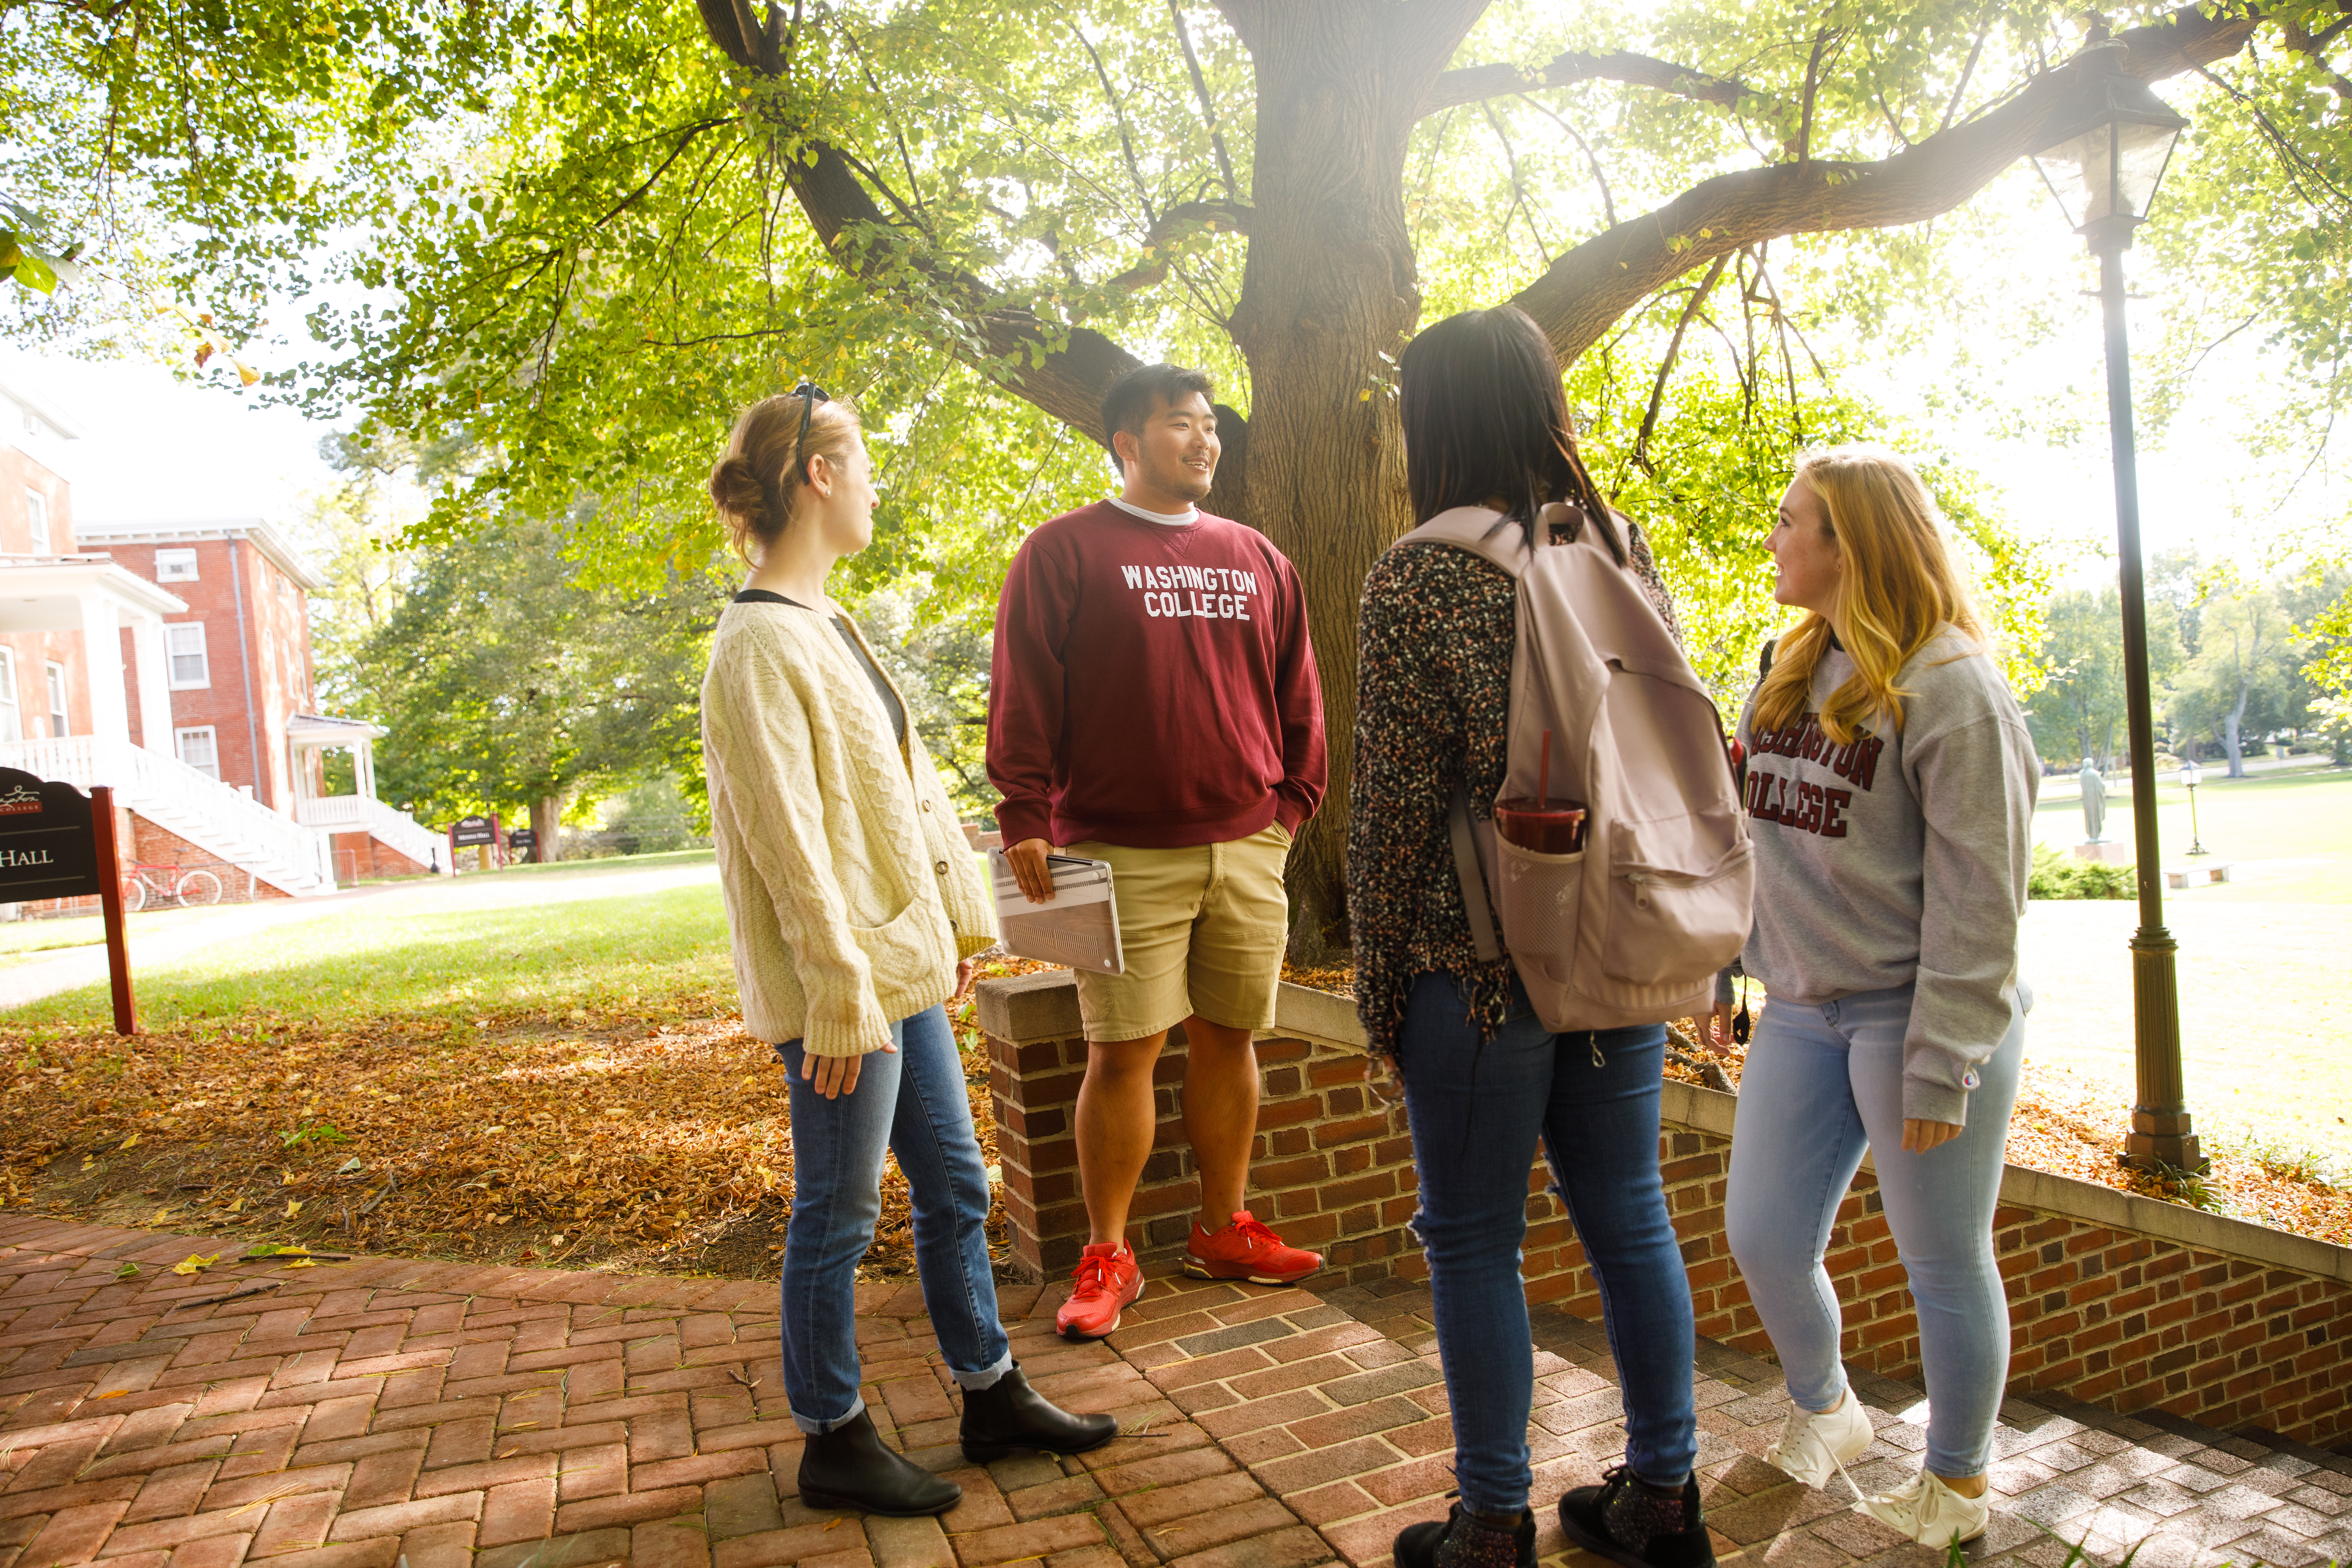 Students gathered in a circle talking under a tree